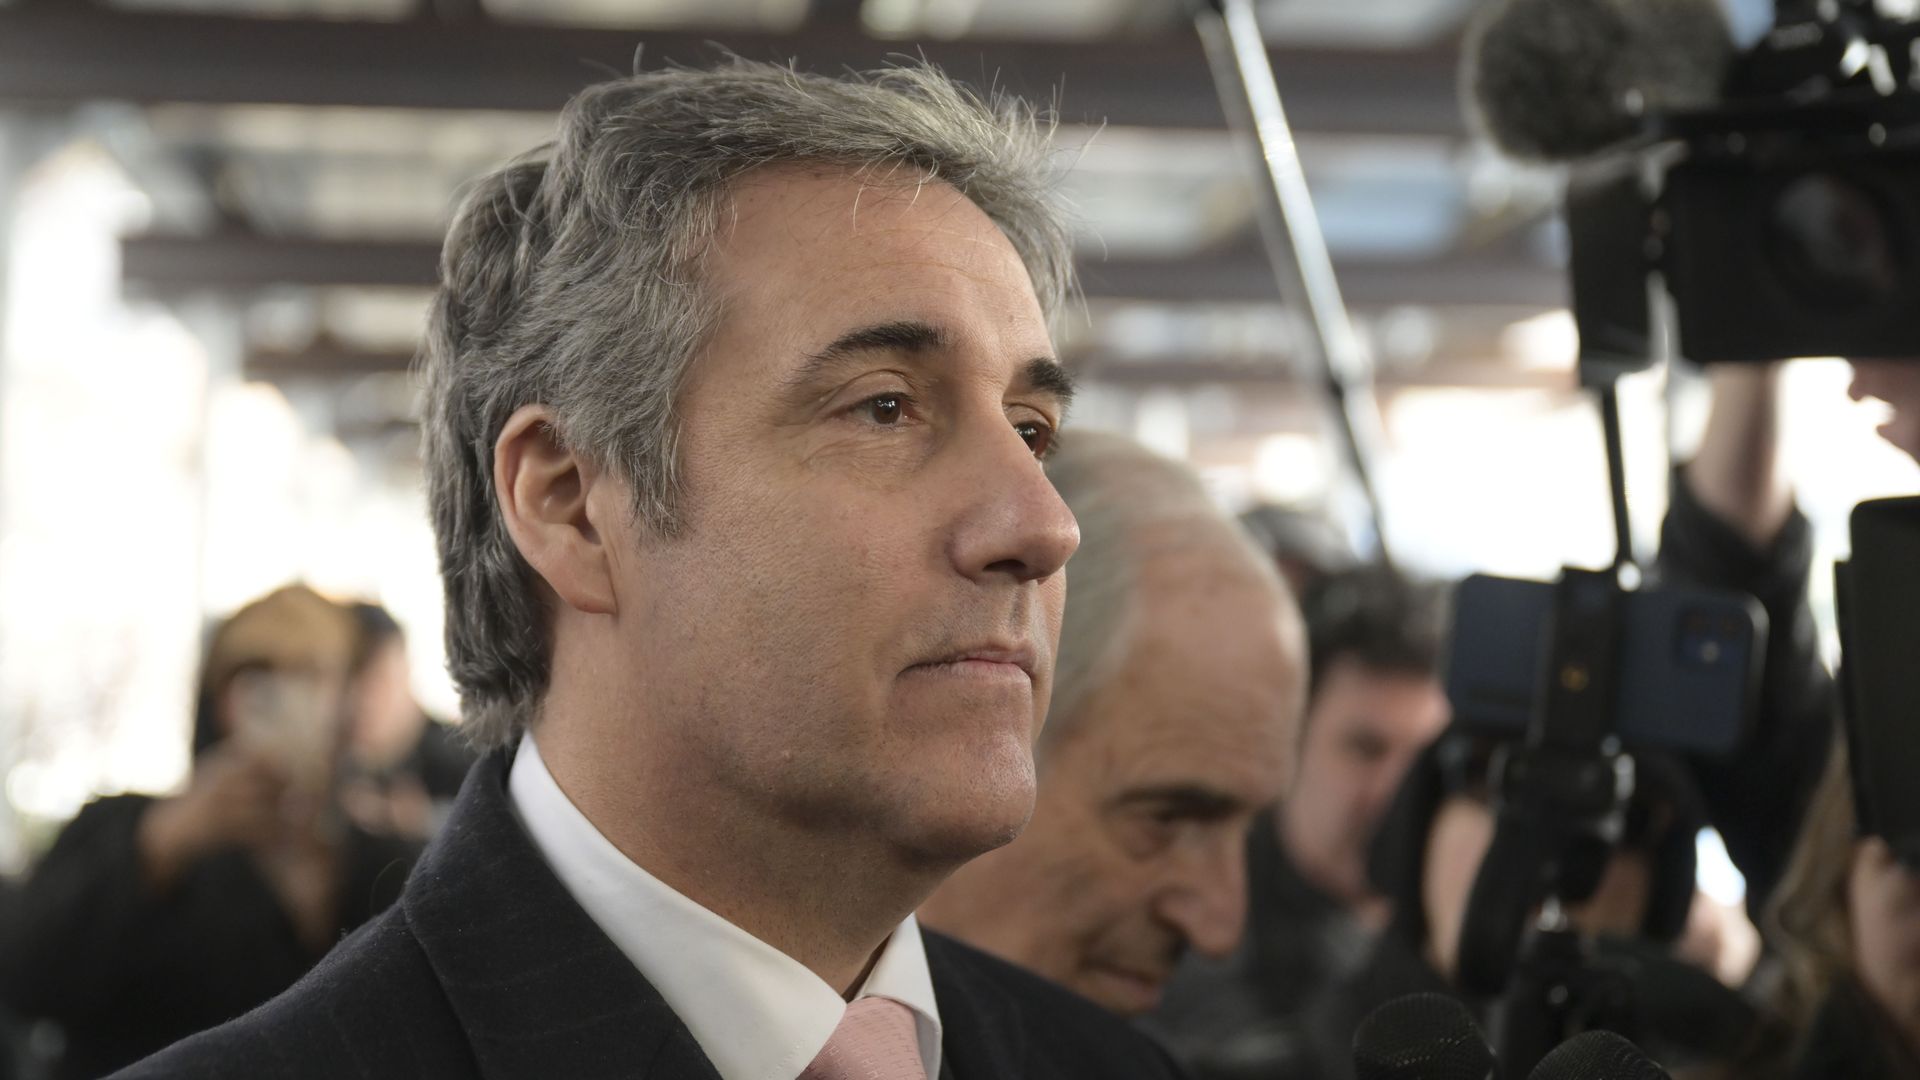 Michael Cohen, Donald Trump's former lawyer and fixer, walks out of a Manhattan courthouse after testifying before a grand jury, in New York, United States on March 15, 2023